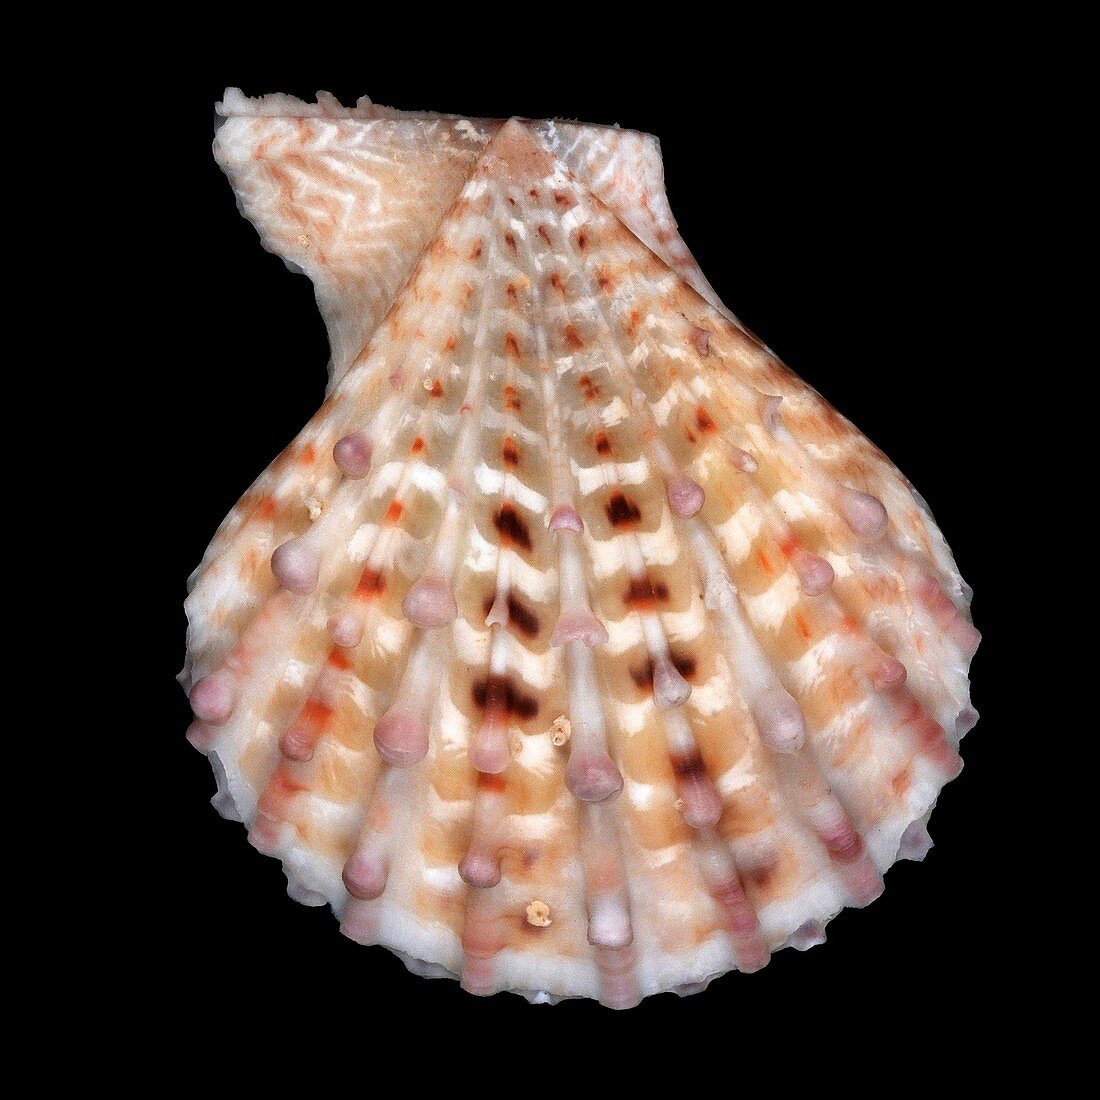 Little knobby scallop shell